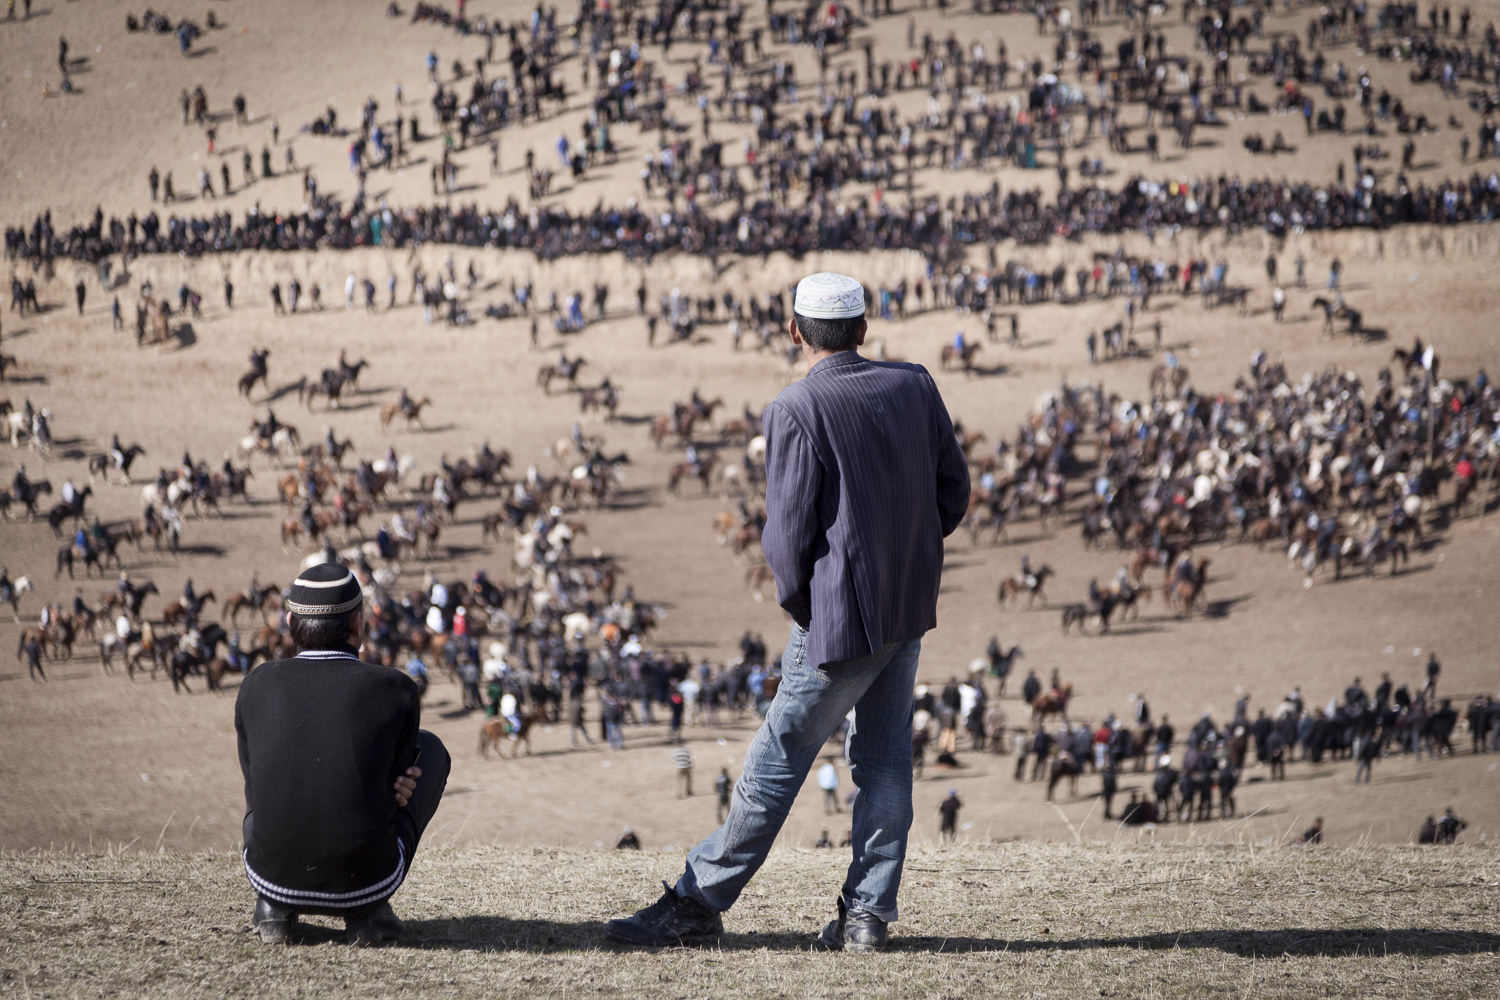  Young spectators view a horde of buzkashi horses from a nearby hill in Dangara, southern Tajikistan. 